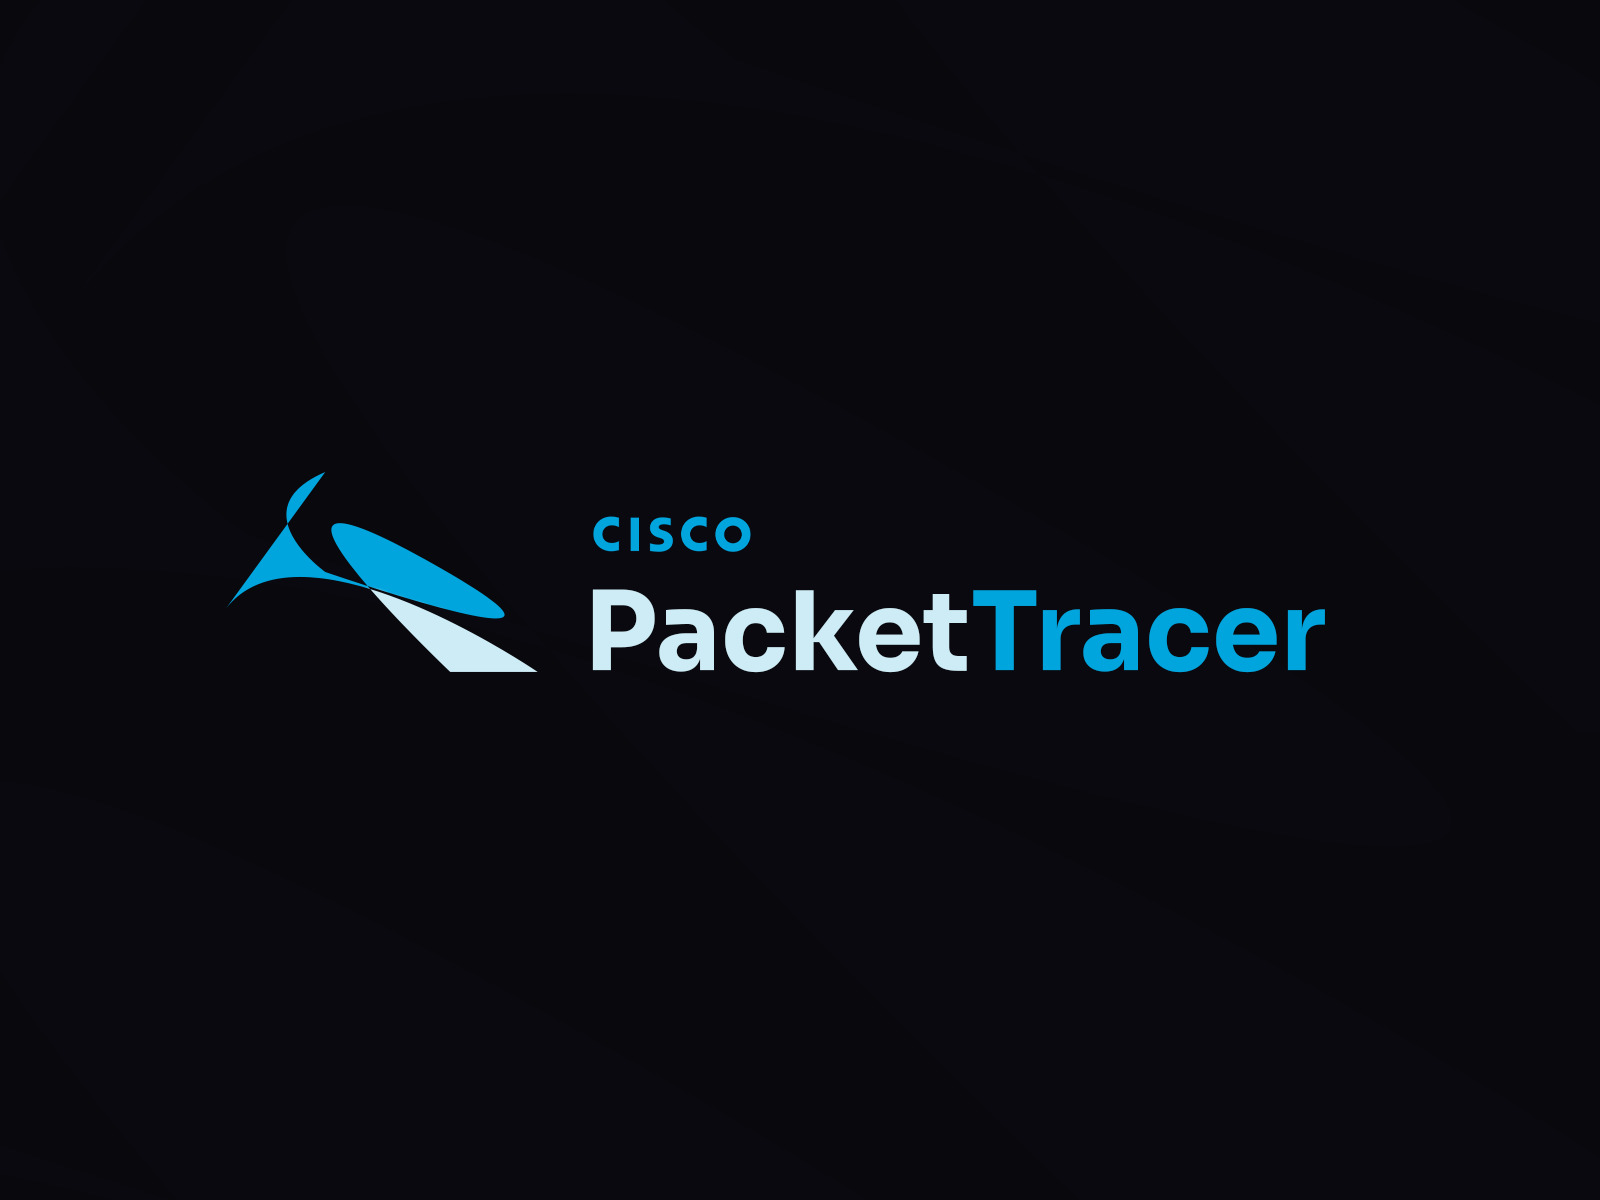 How To Download Cisco Packet Tracer